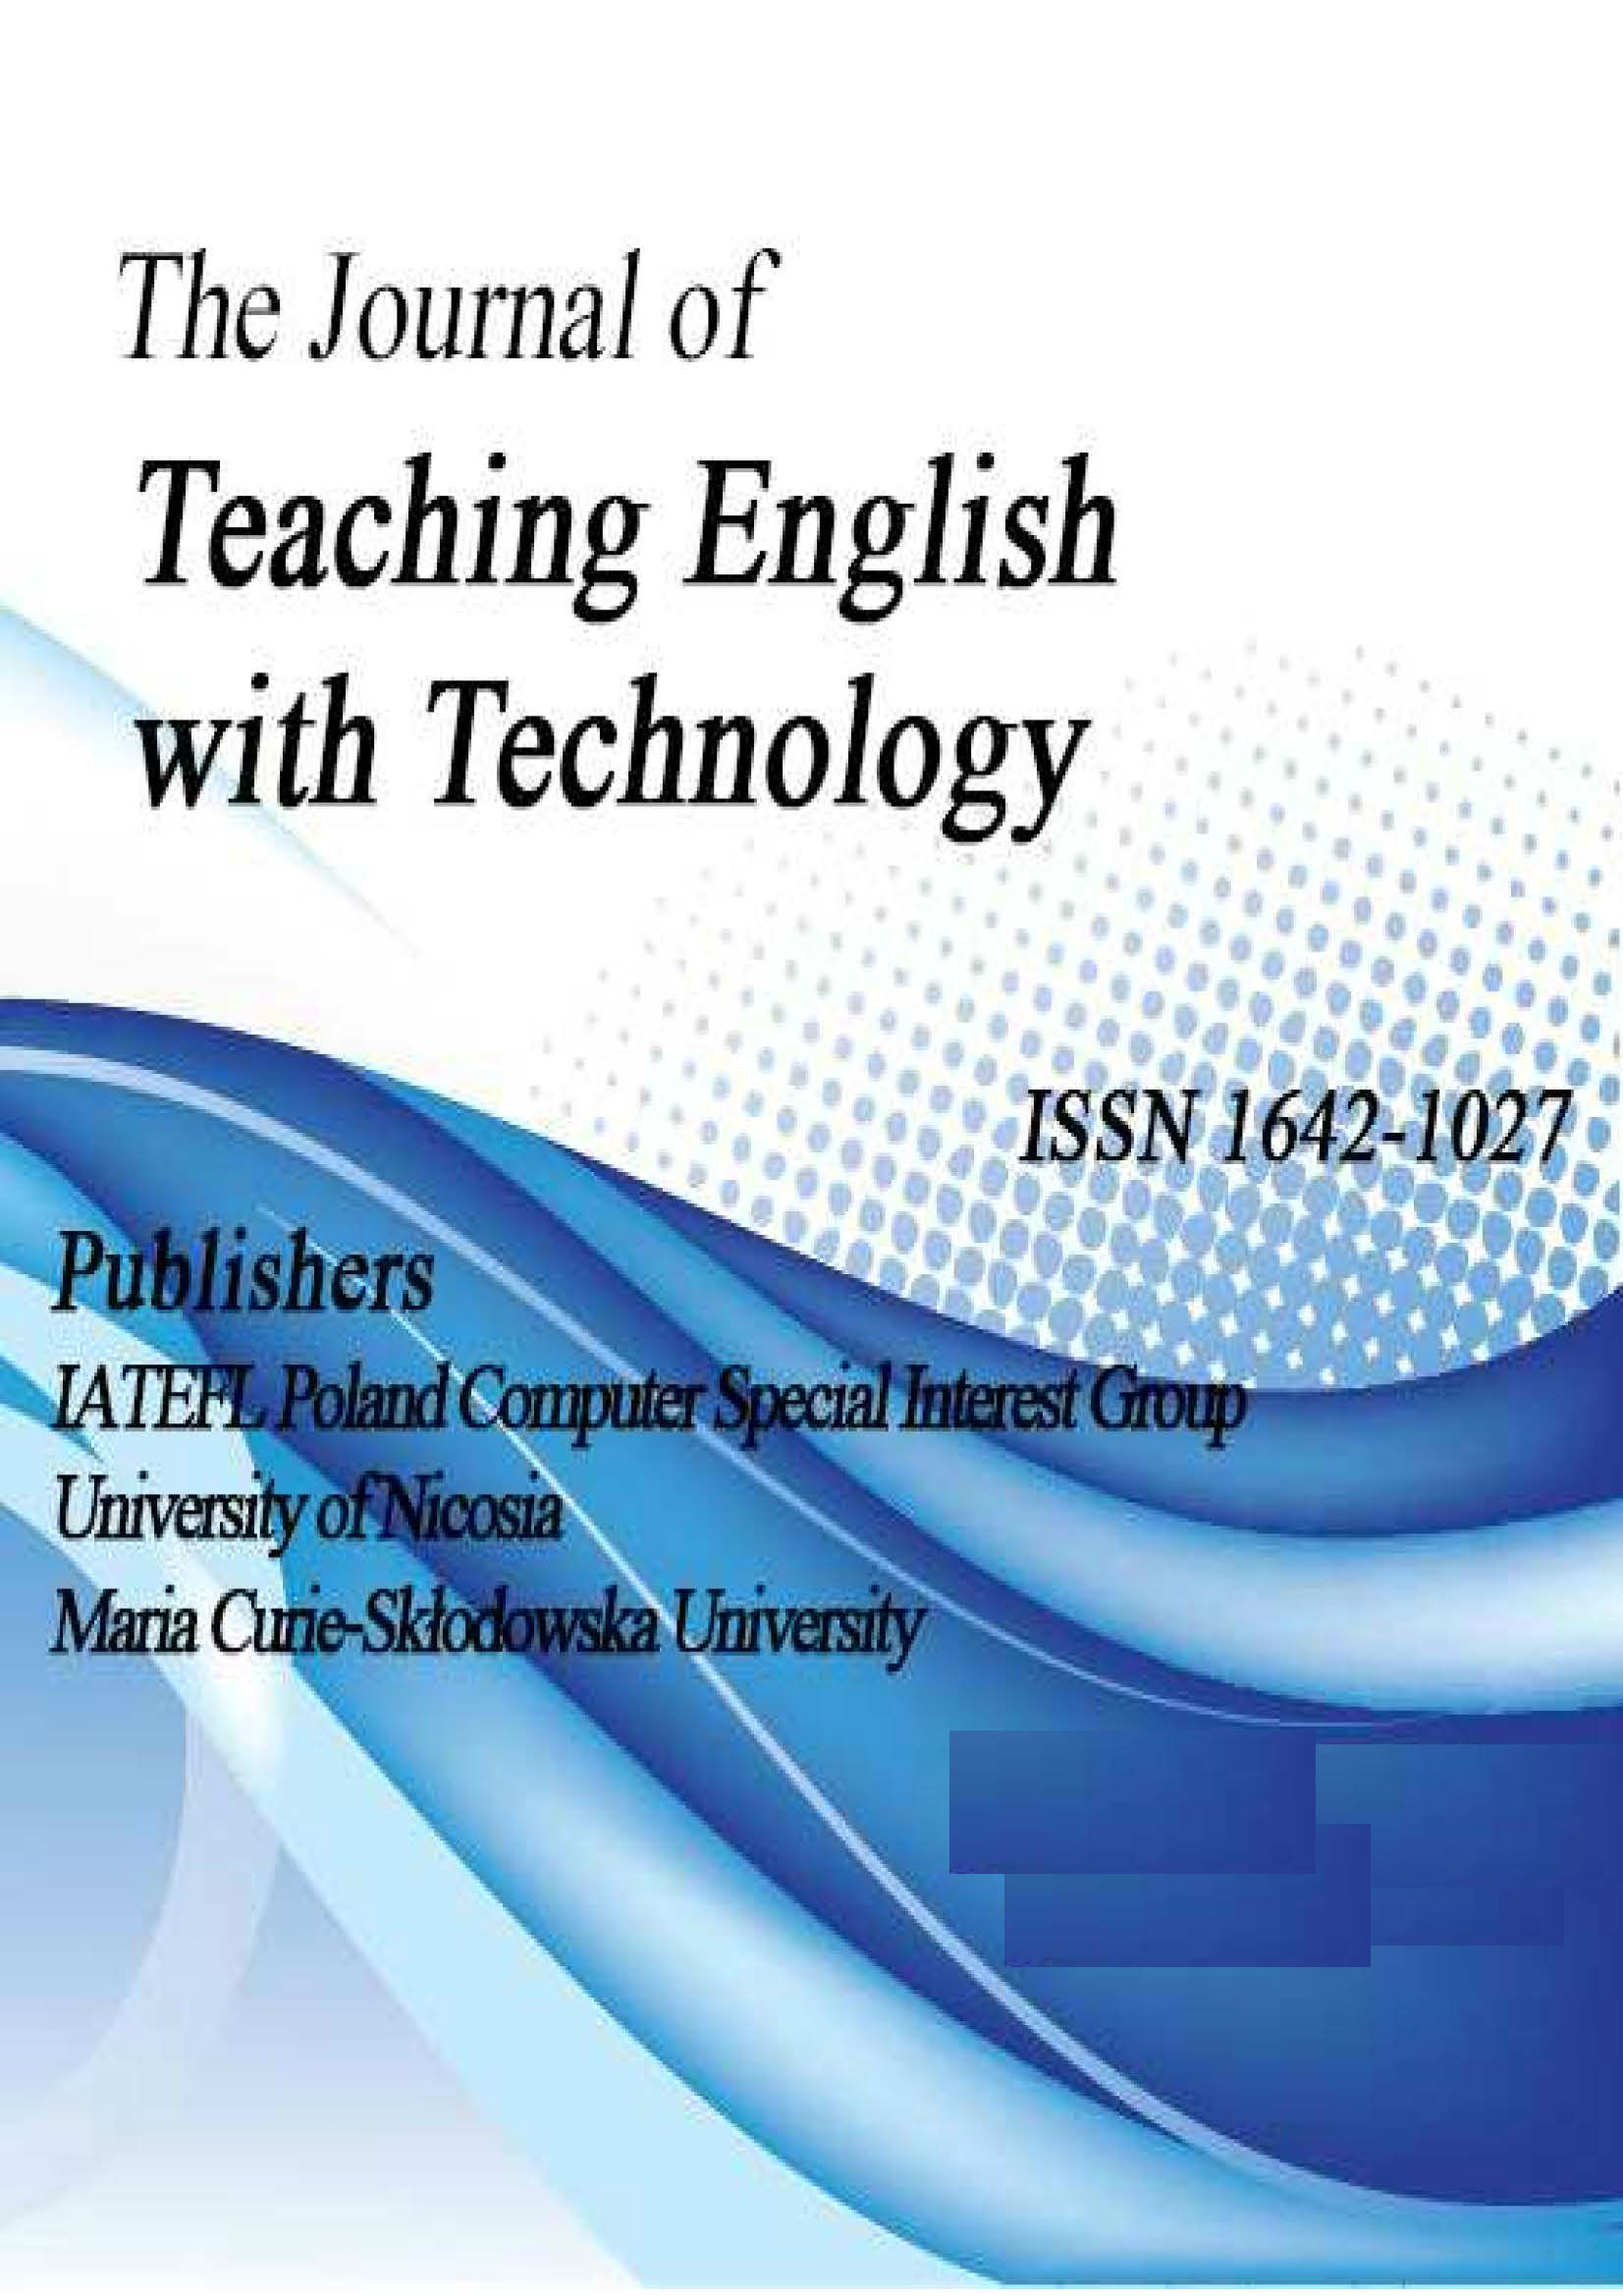 TEACHING ENGLISH MULTIMODALLY. THE USE OF NEW TRAVEL WEBSITES IN EFL ENVIRONMENTS